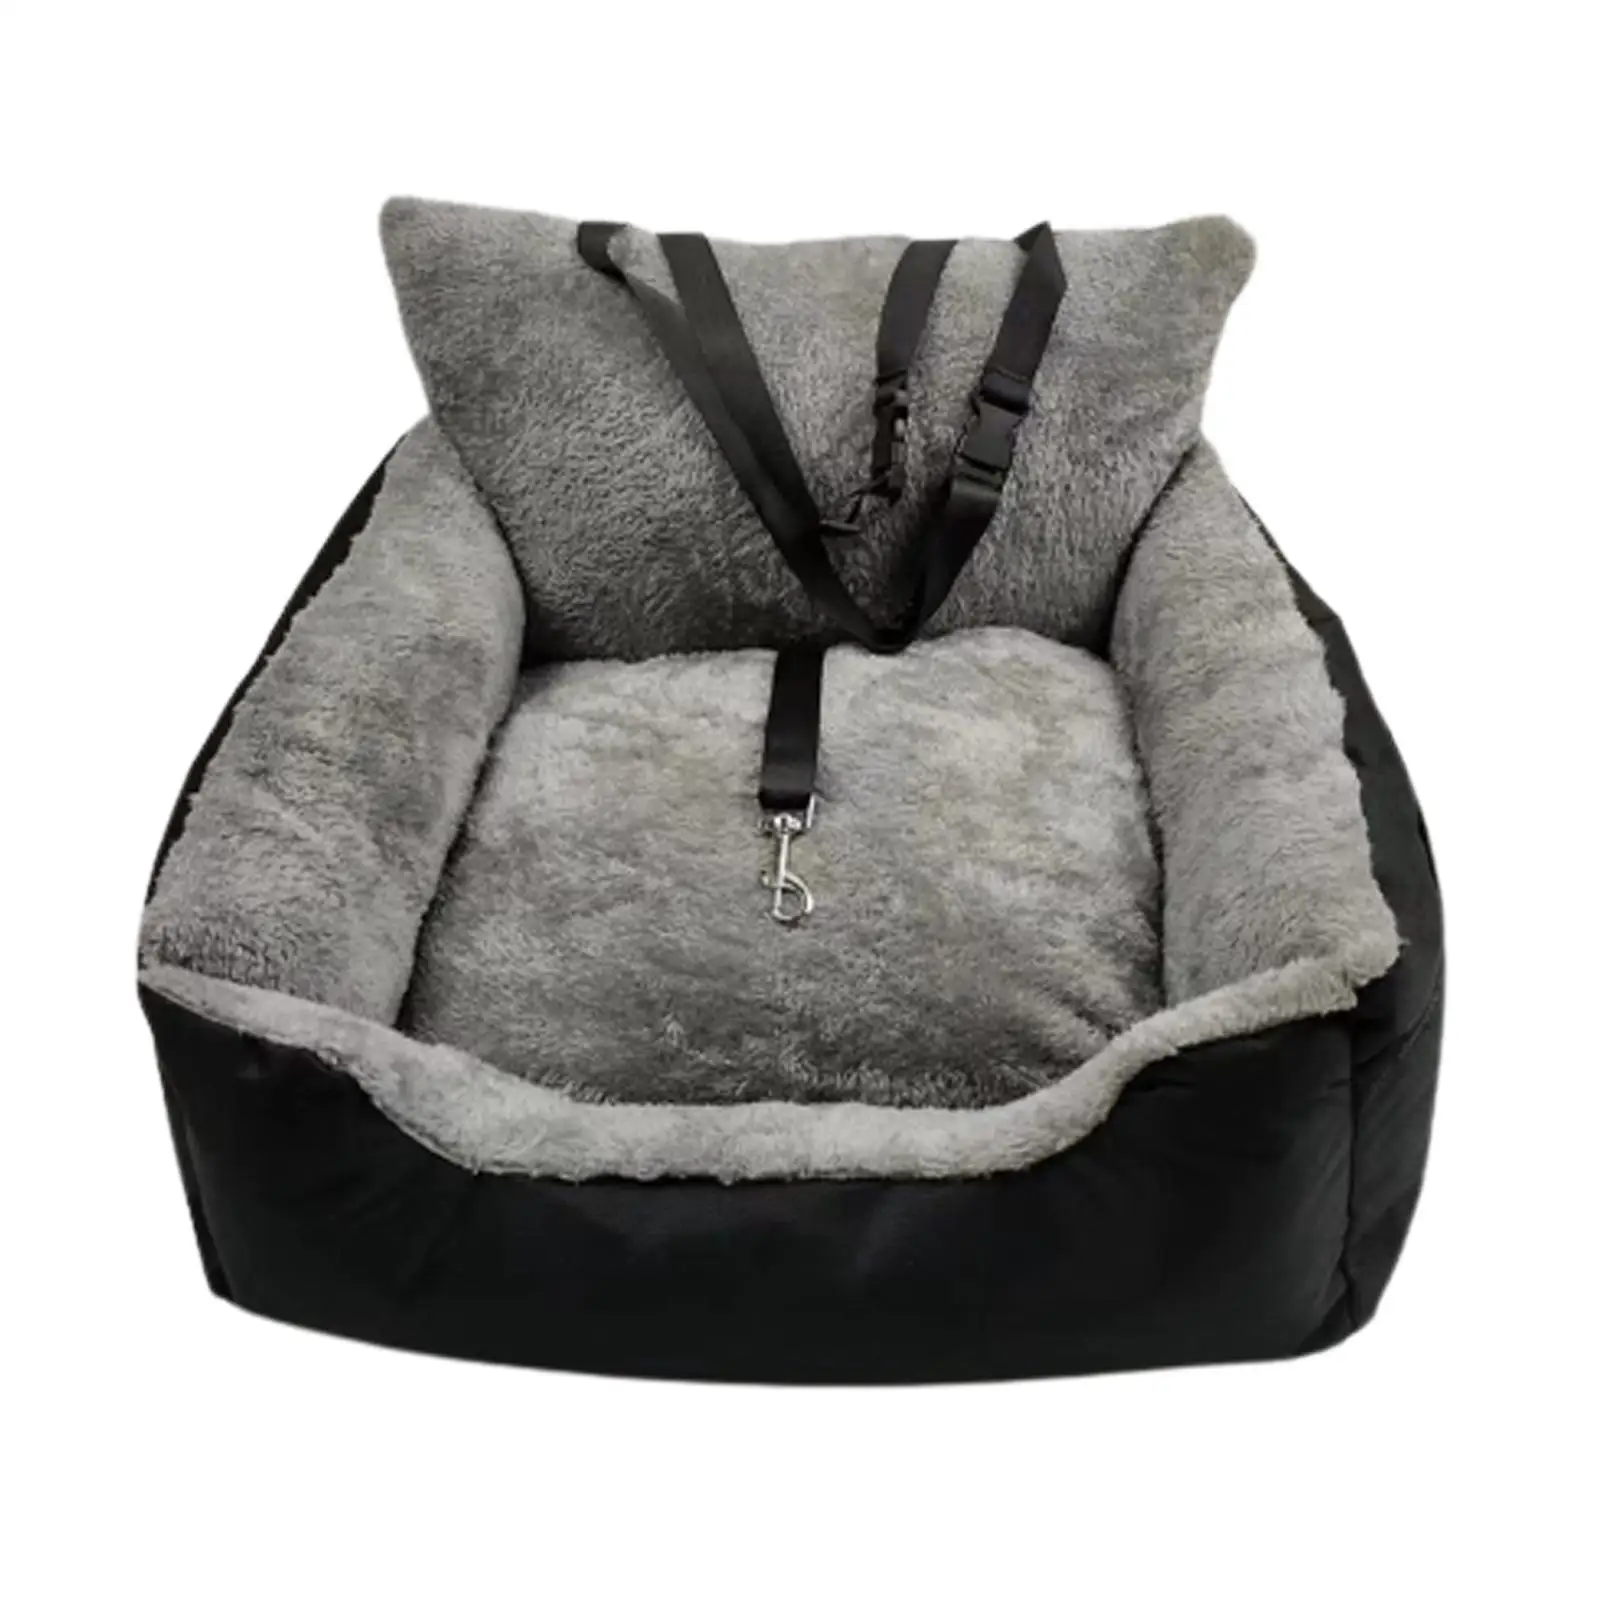 Dog Car Seat Booster Seat Nest with Removable Cushion Car Travel Bed Dog Car Travel Carrier Bed for Small Medium Dogs Kitten